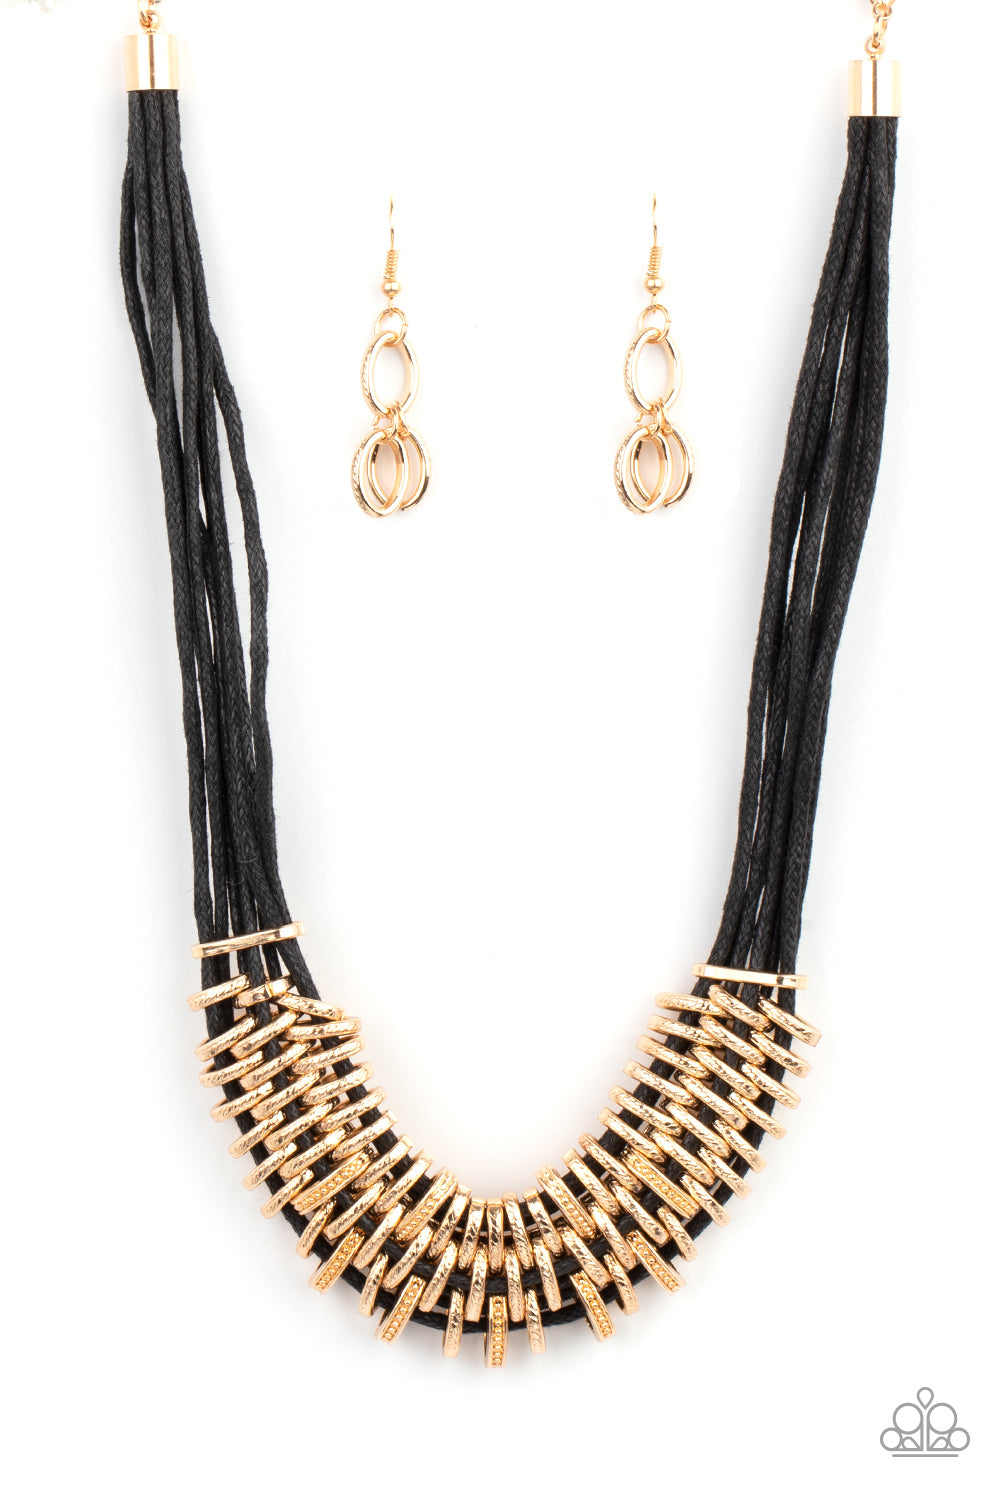 Lock, Stock, and SPARKLE - Gold Necklace- Paparazzi Accessories - Paparazzi Accessories 